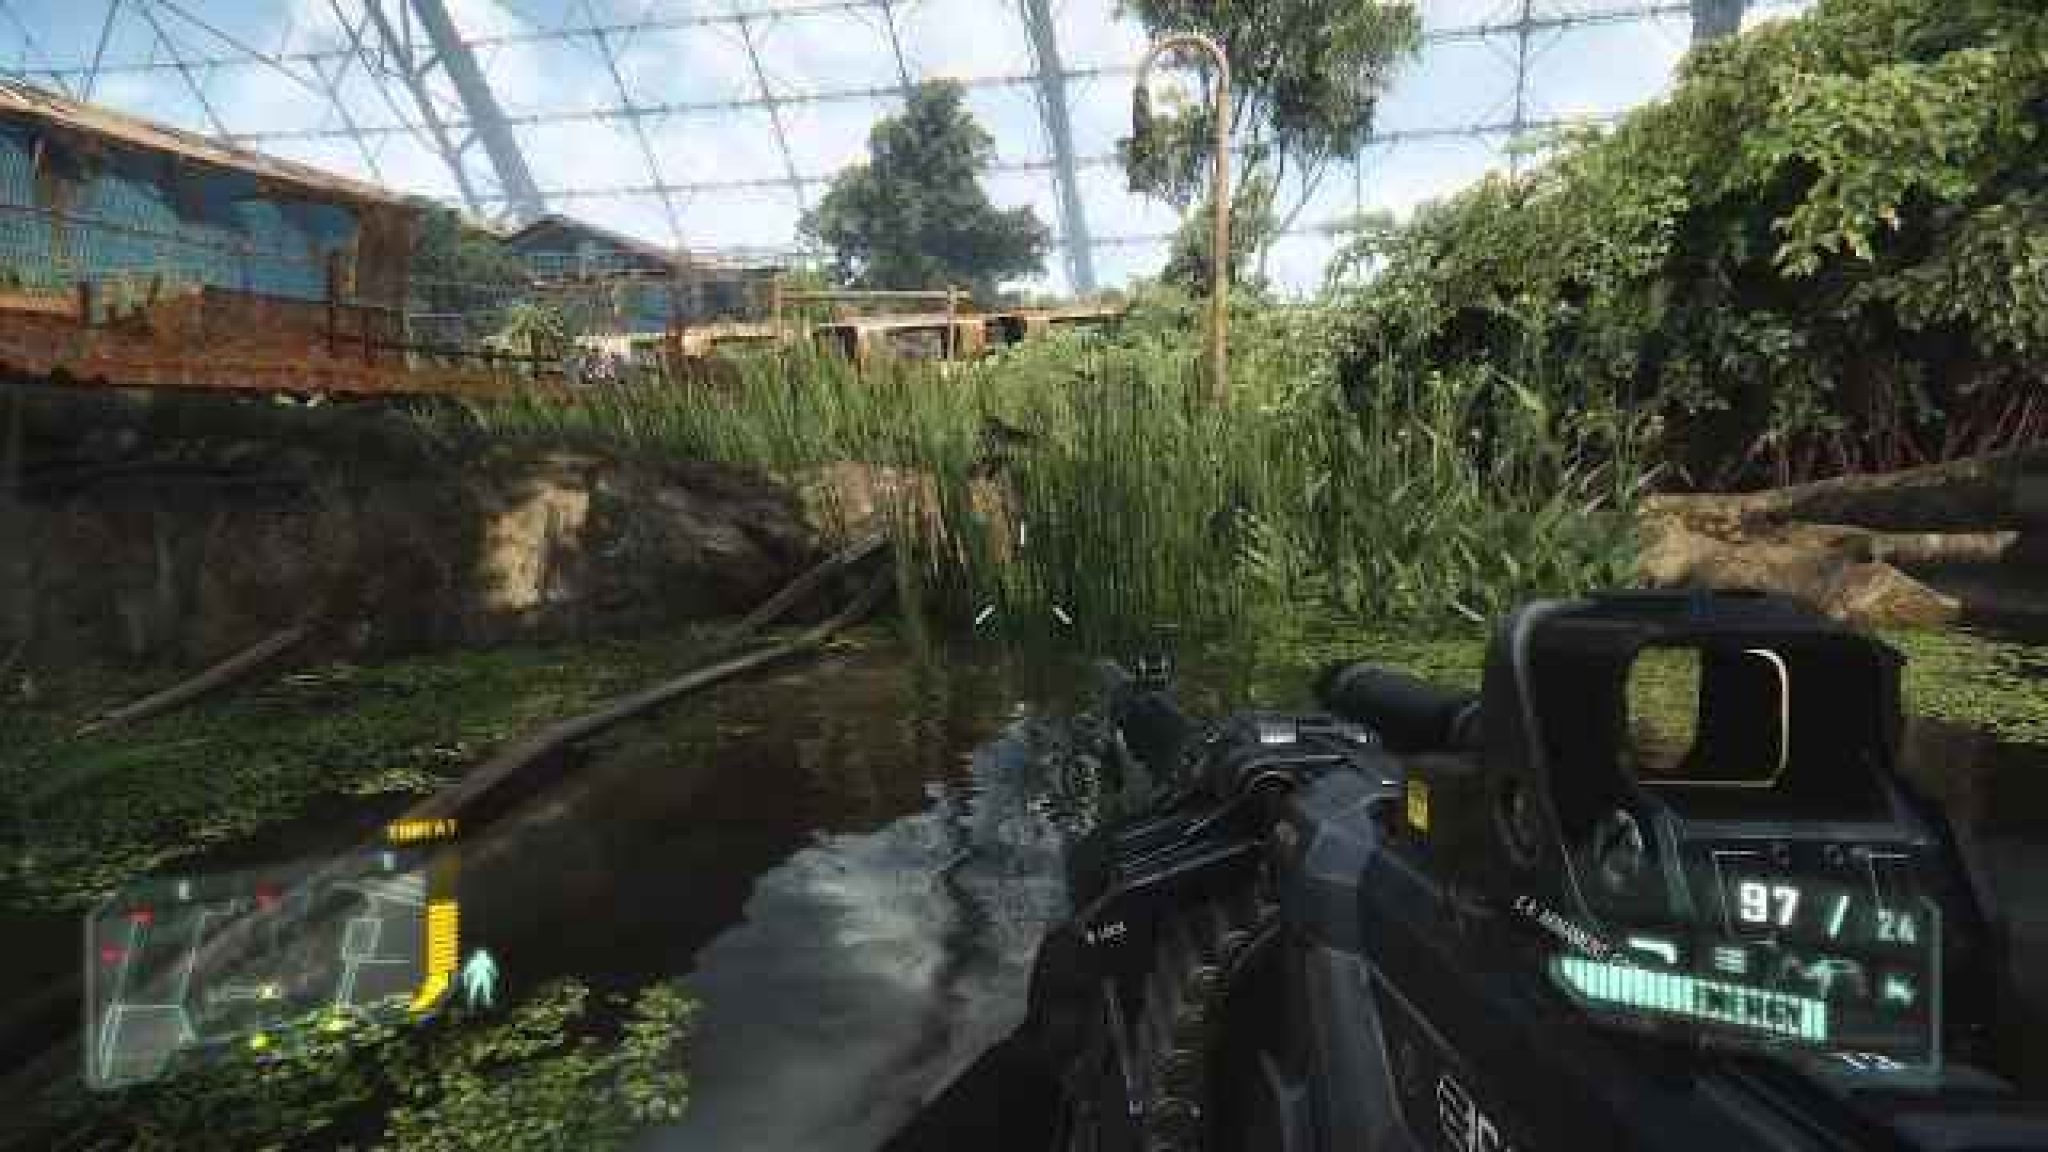 crysis 3 highly compressed 10mb